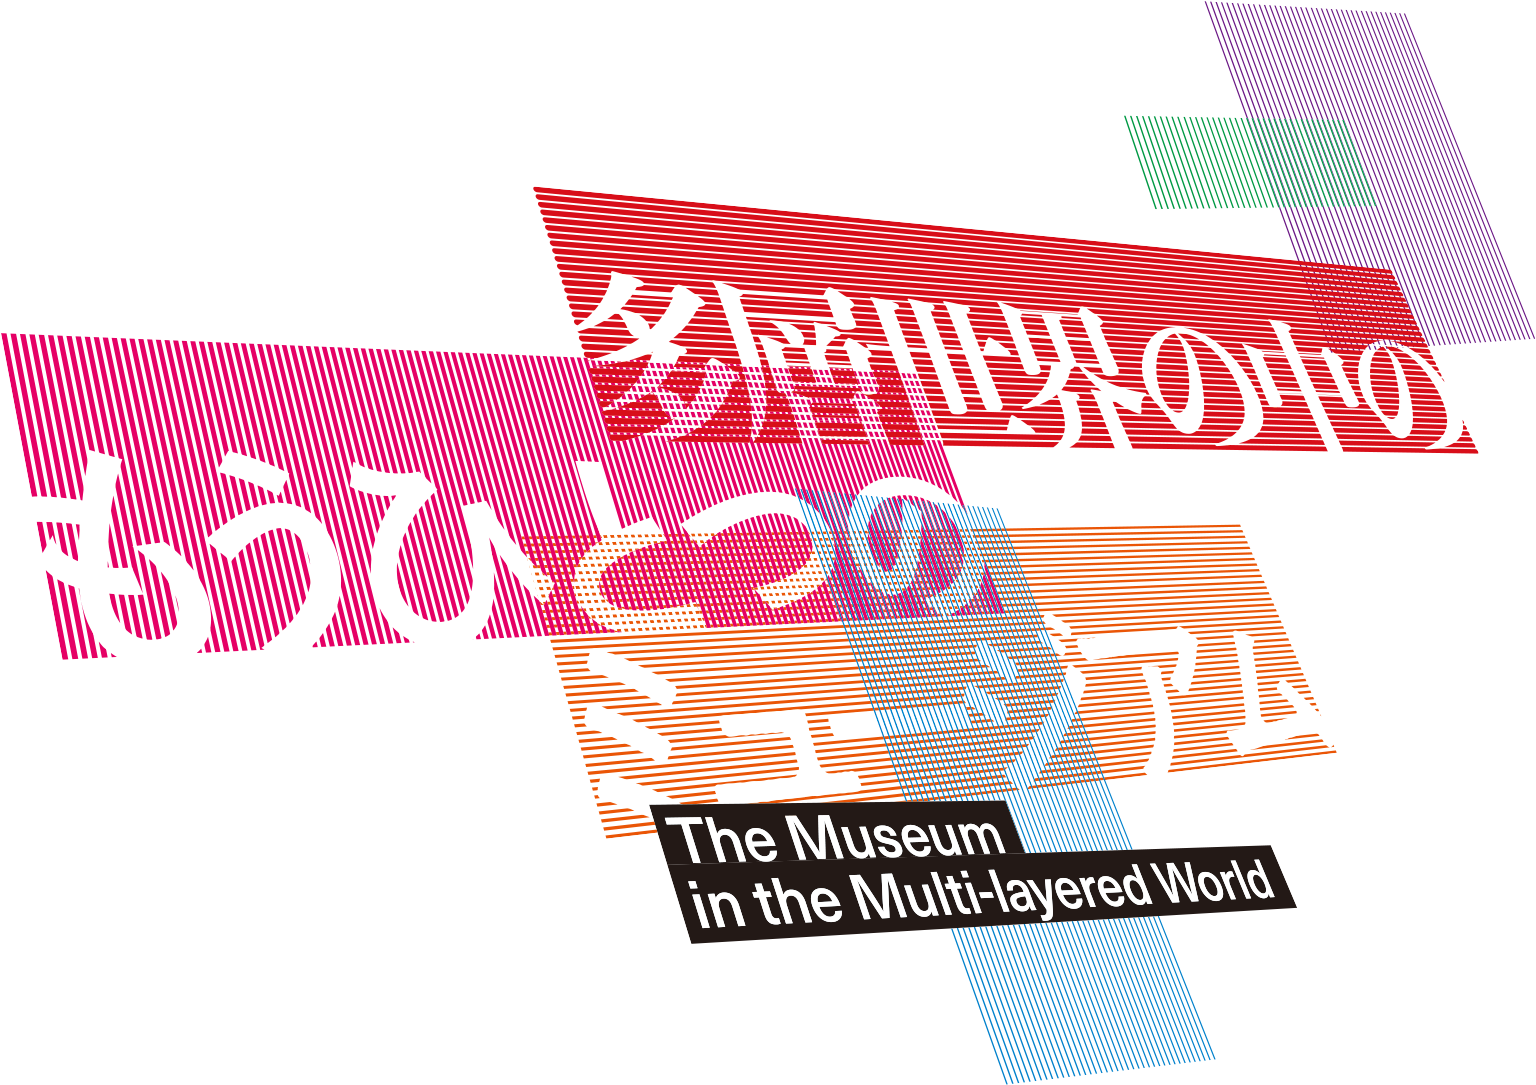 The Museum in the Multi-layered World